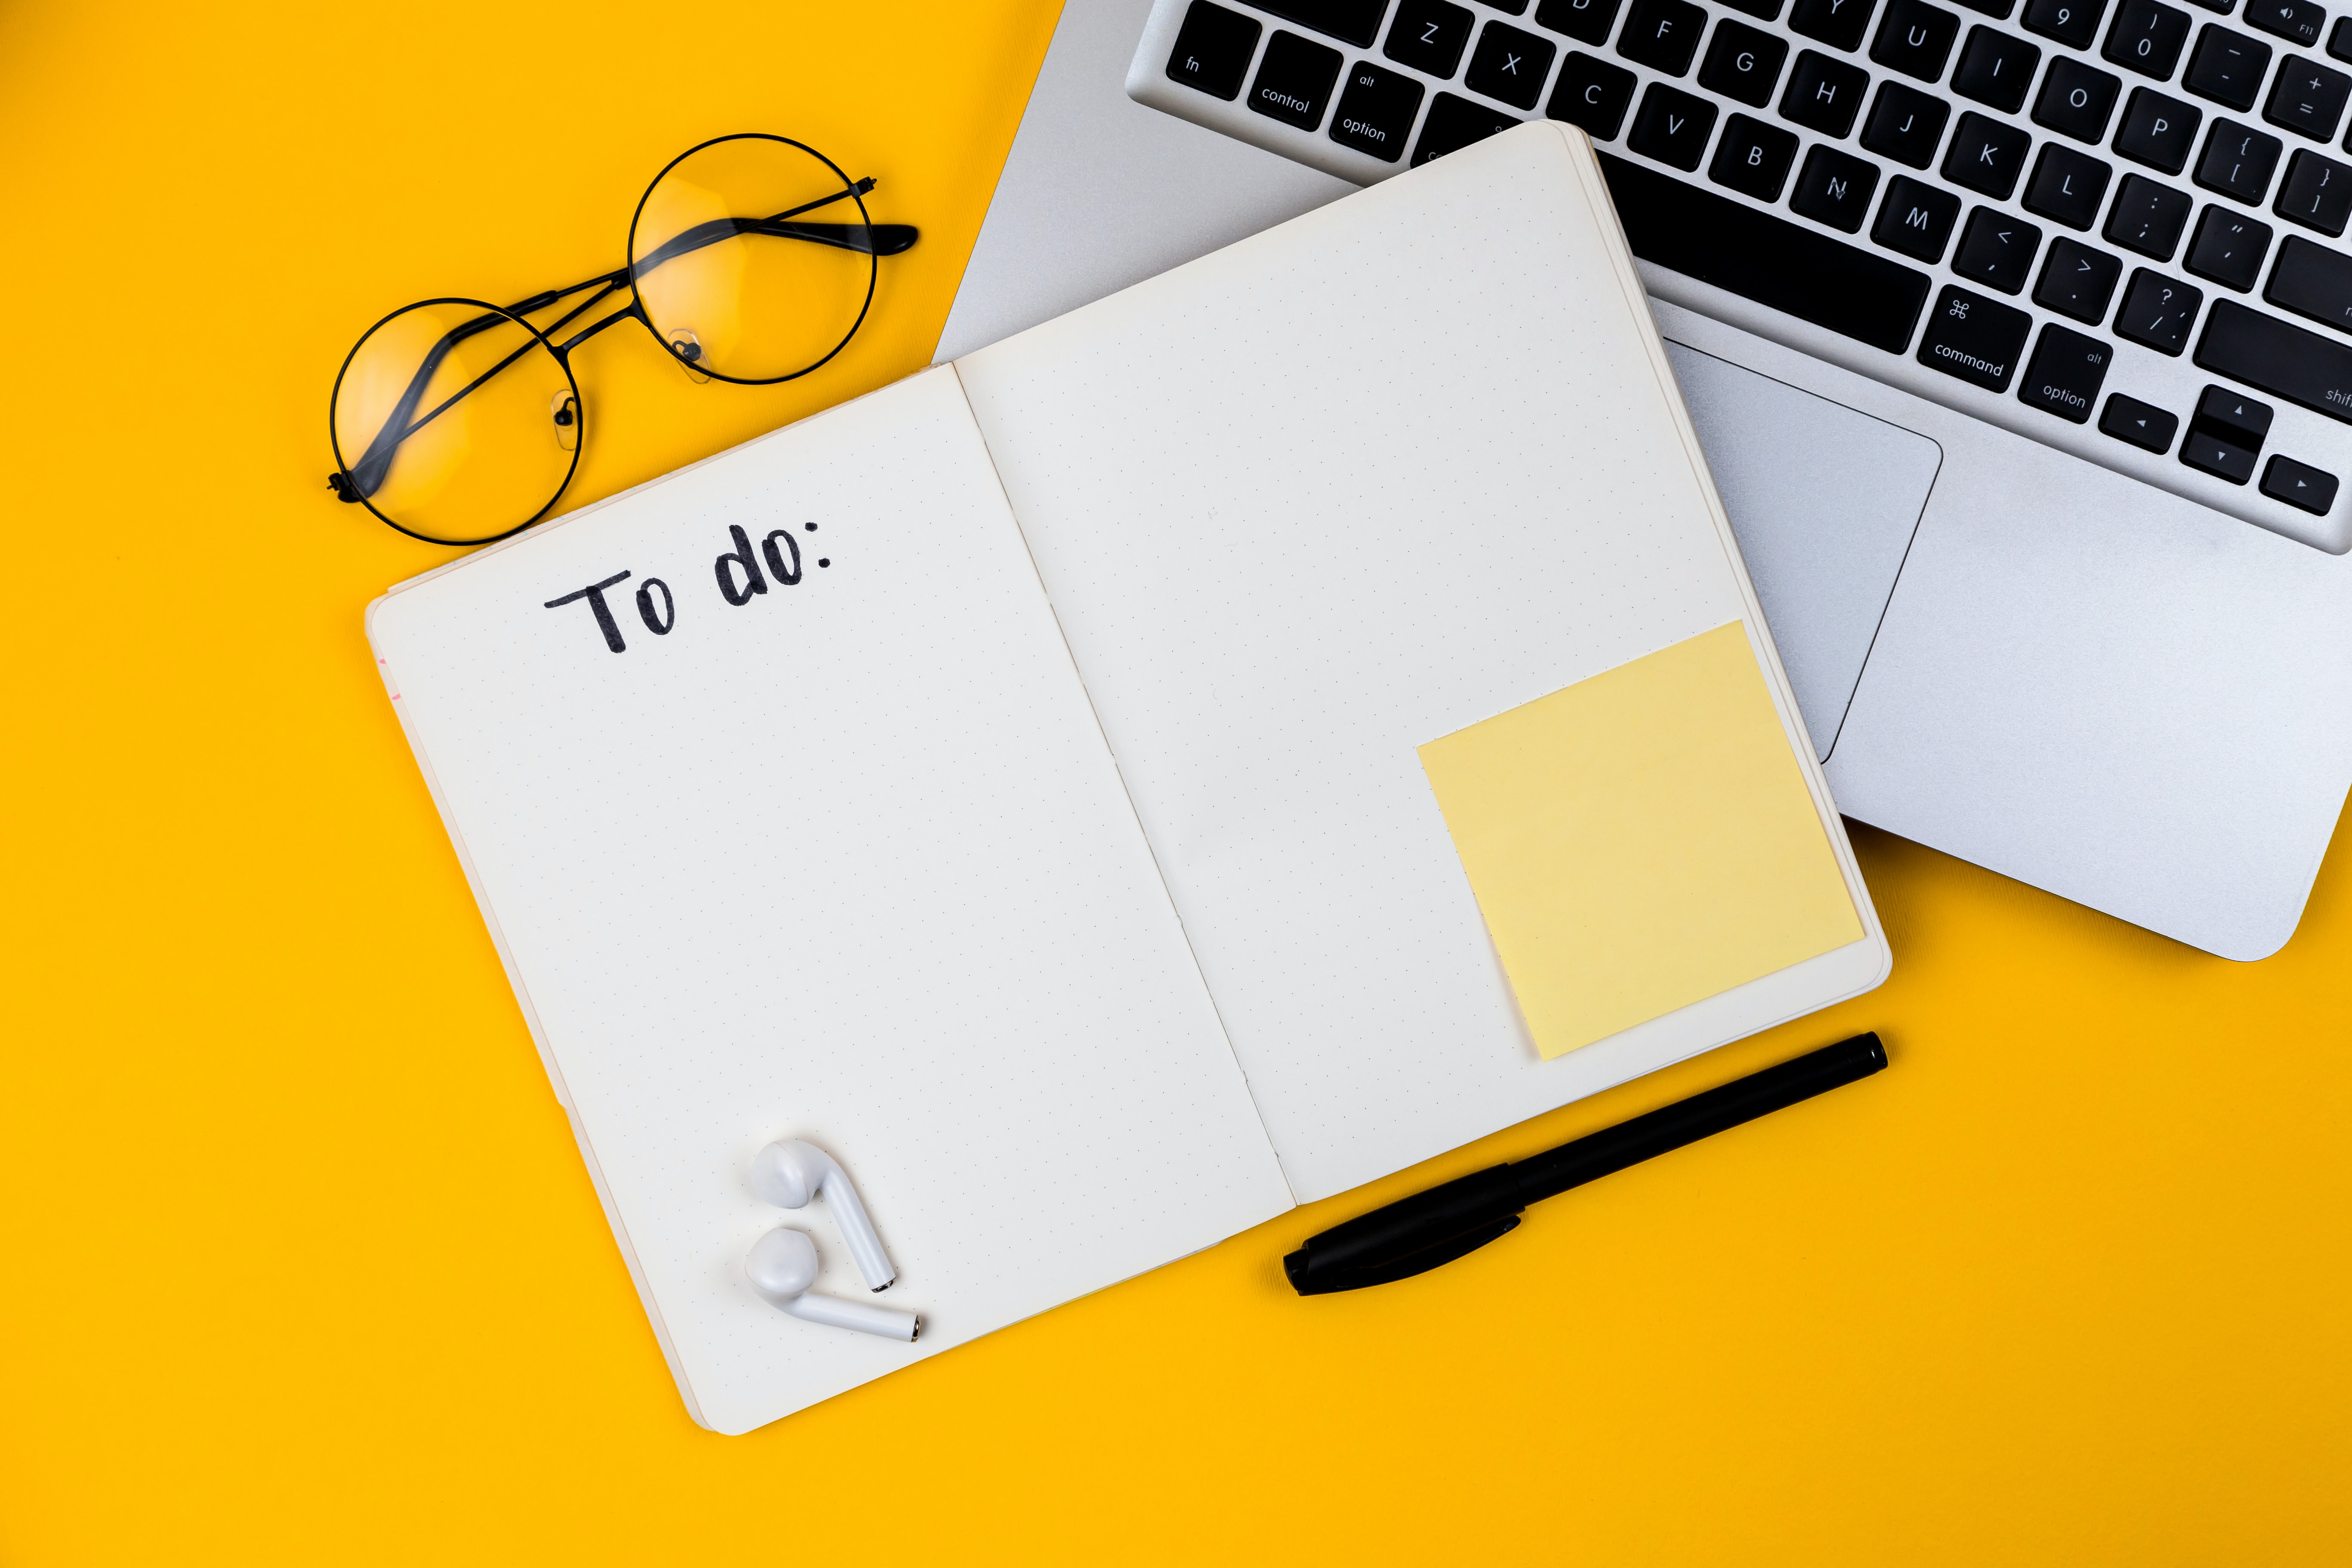 To do Notebook and laptop on yellow background